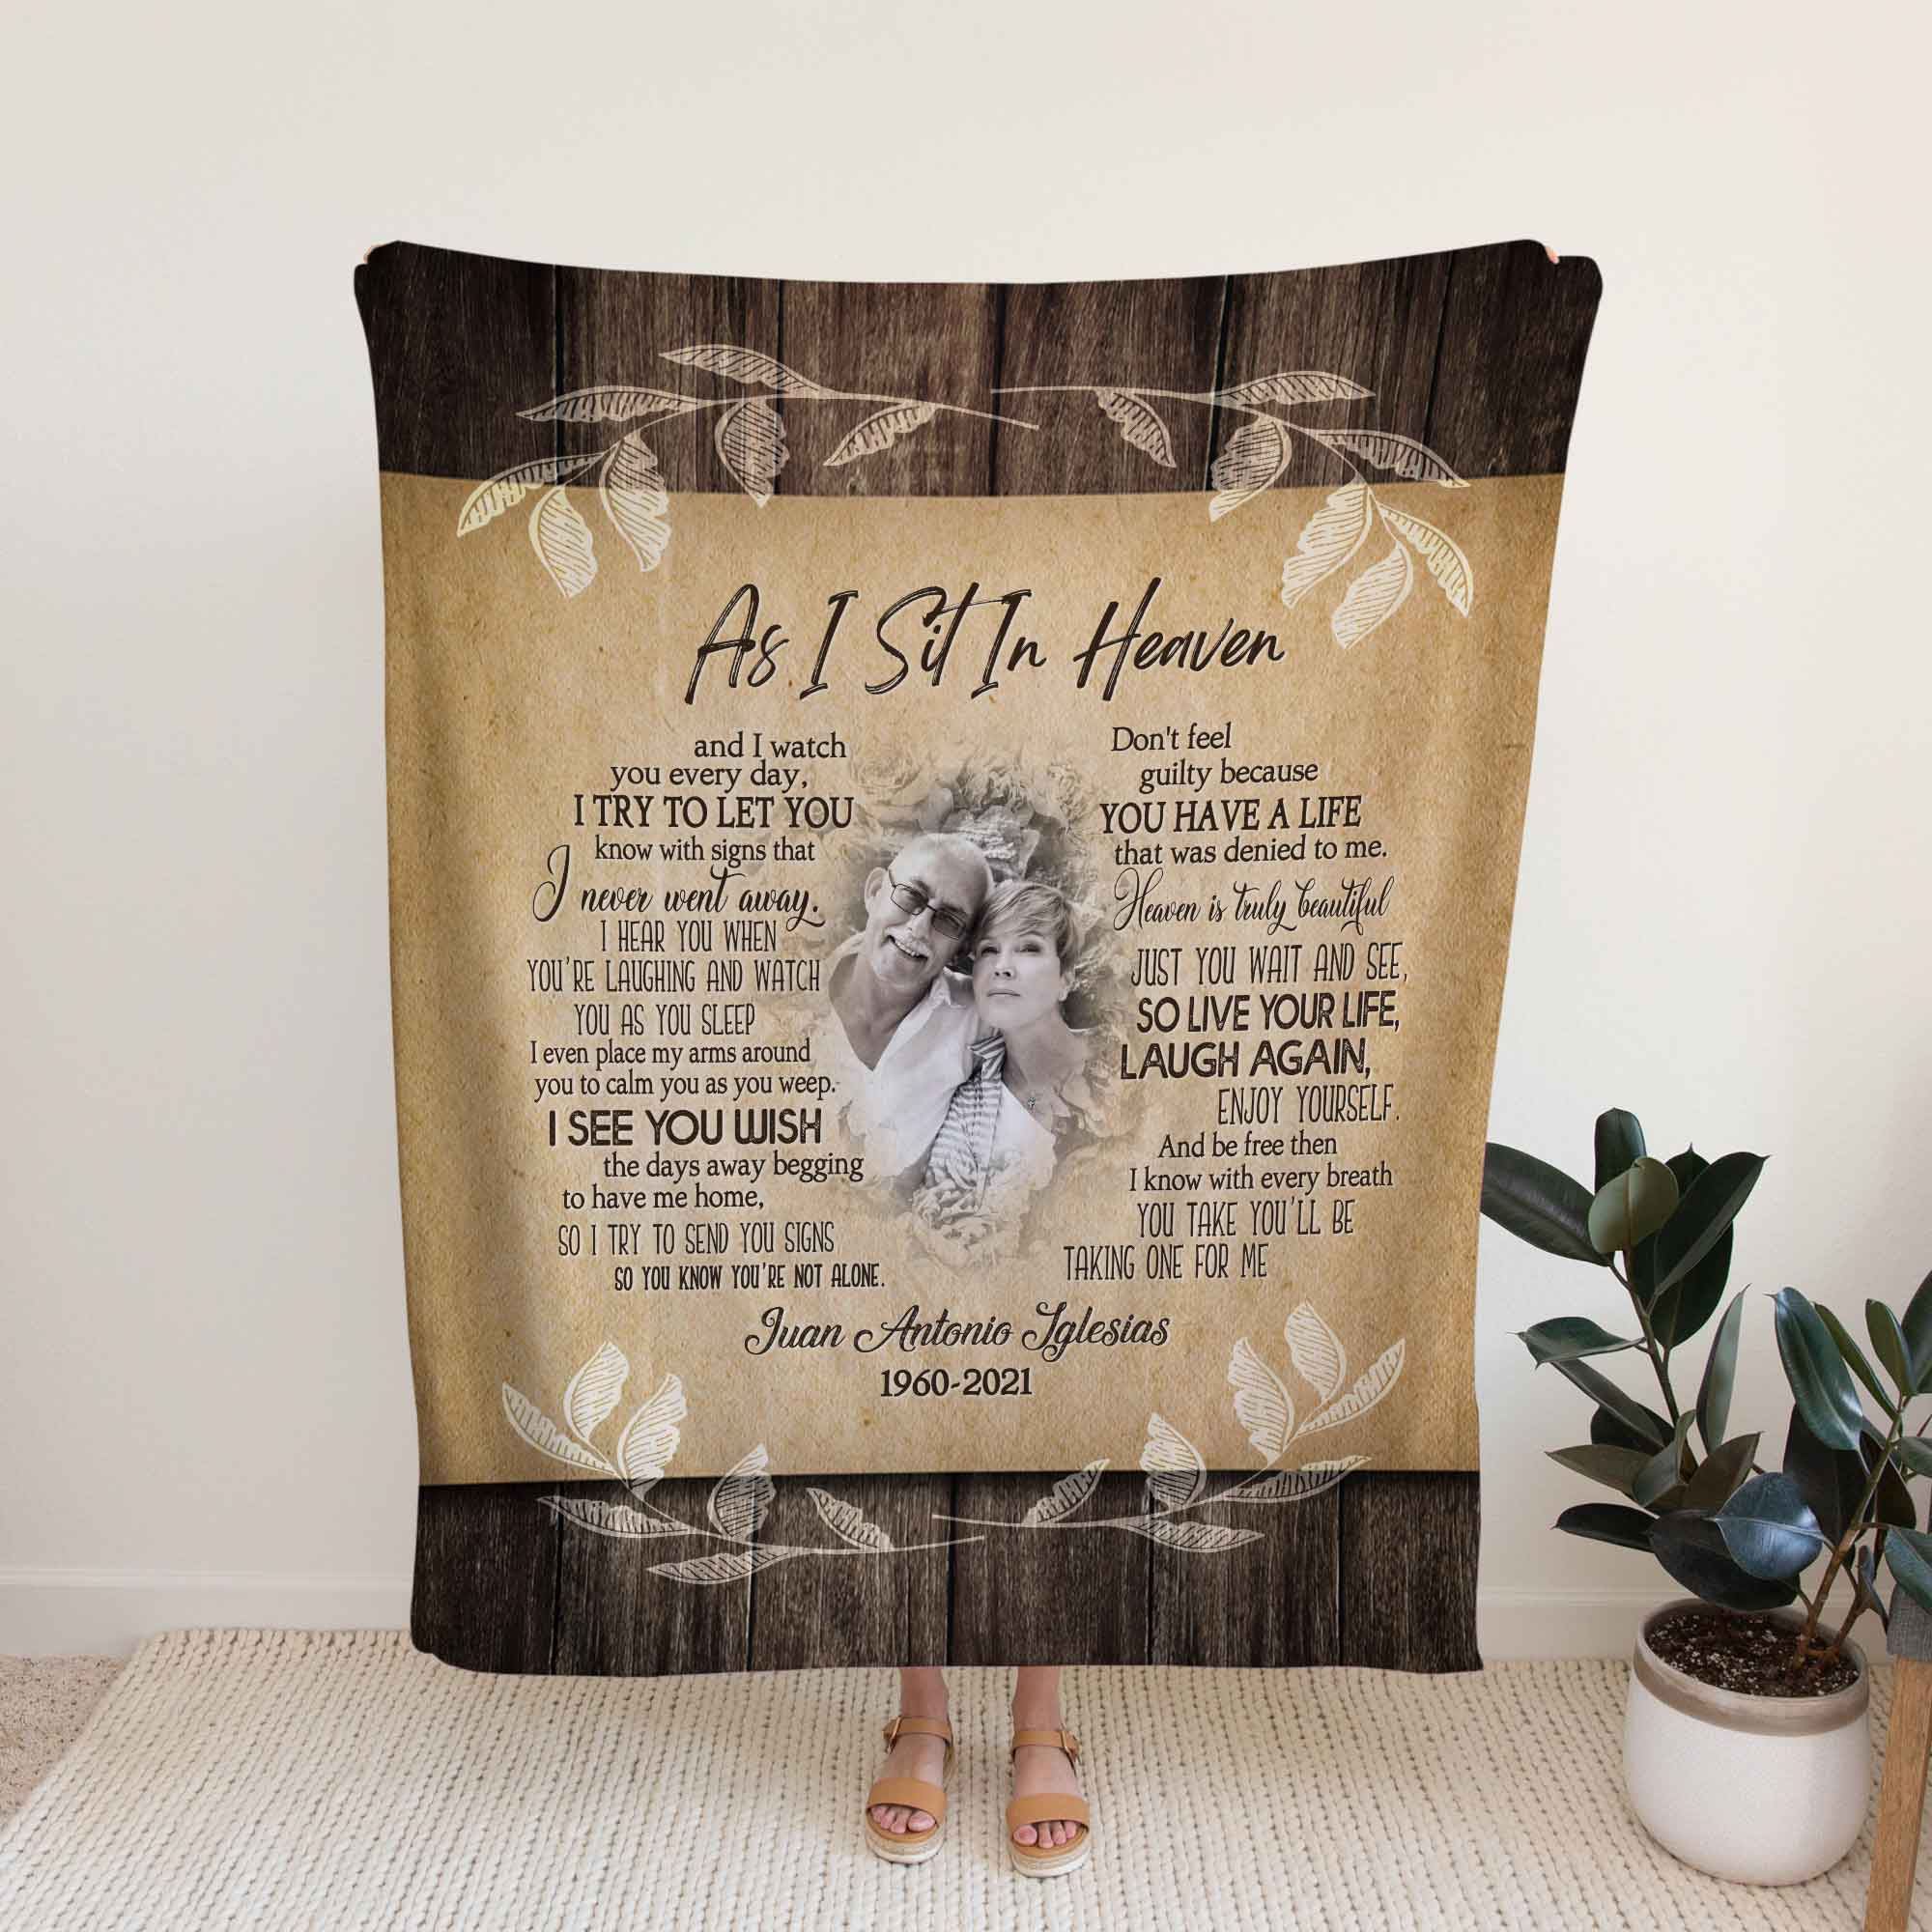 Personalized Memorial Blankets, As I Sit In Heaven Blanket For Loss Of Father/Mother, Custom Name Throw Blanket